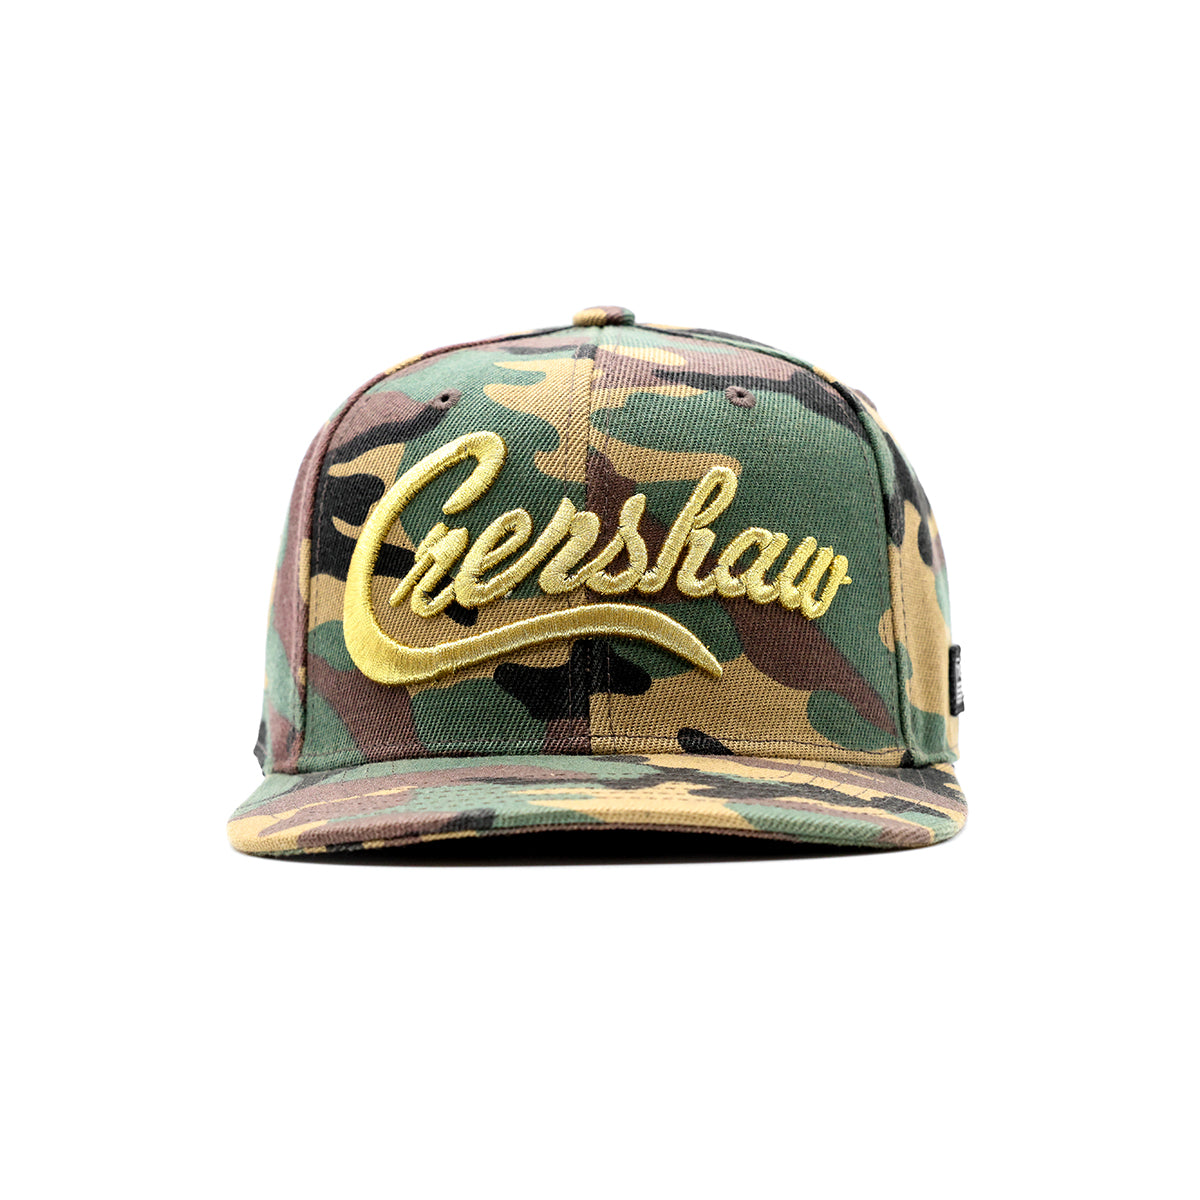 Crenshaw Limited Edition Snapback - Camo/Gold - Front